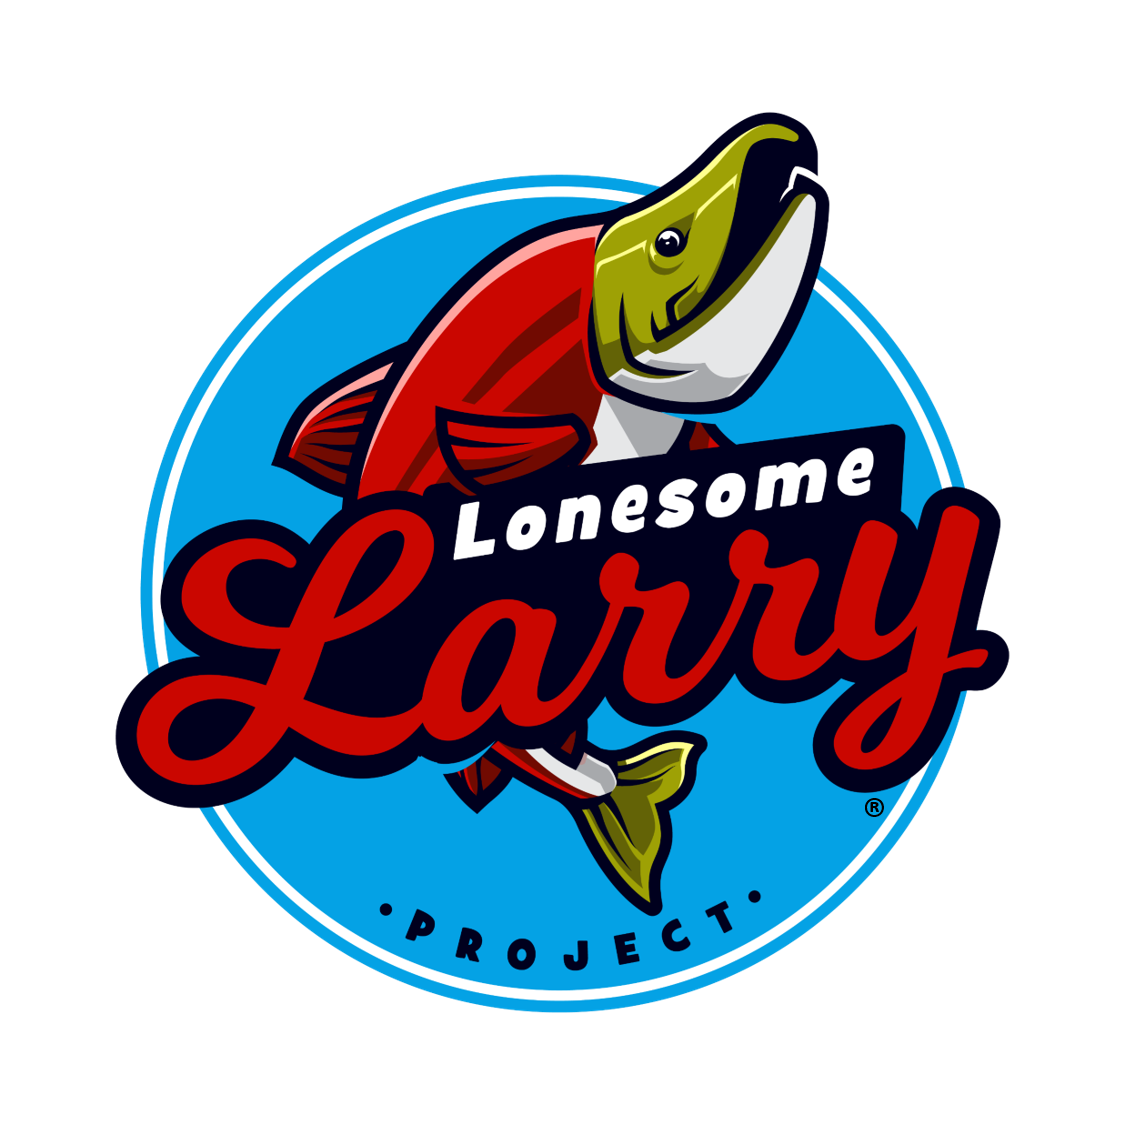 Lonesome Larry Project